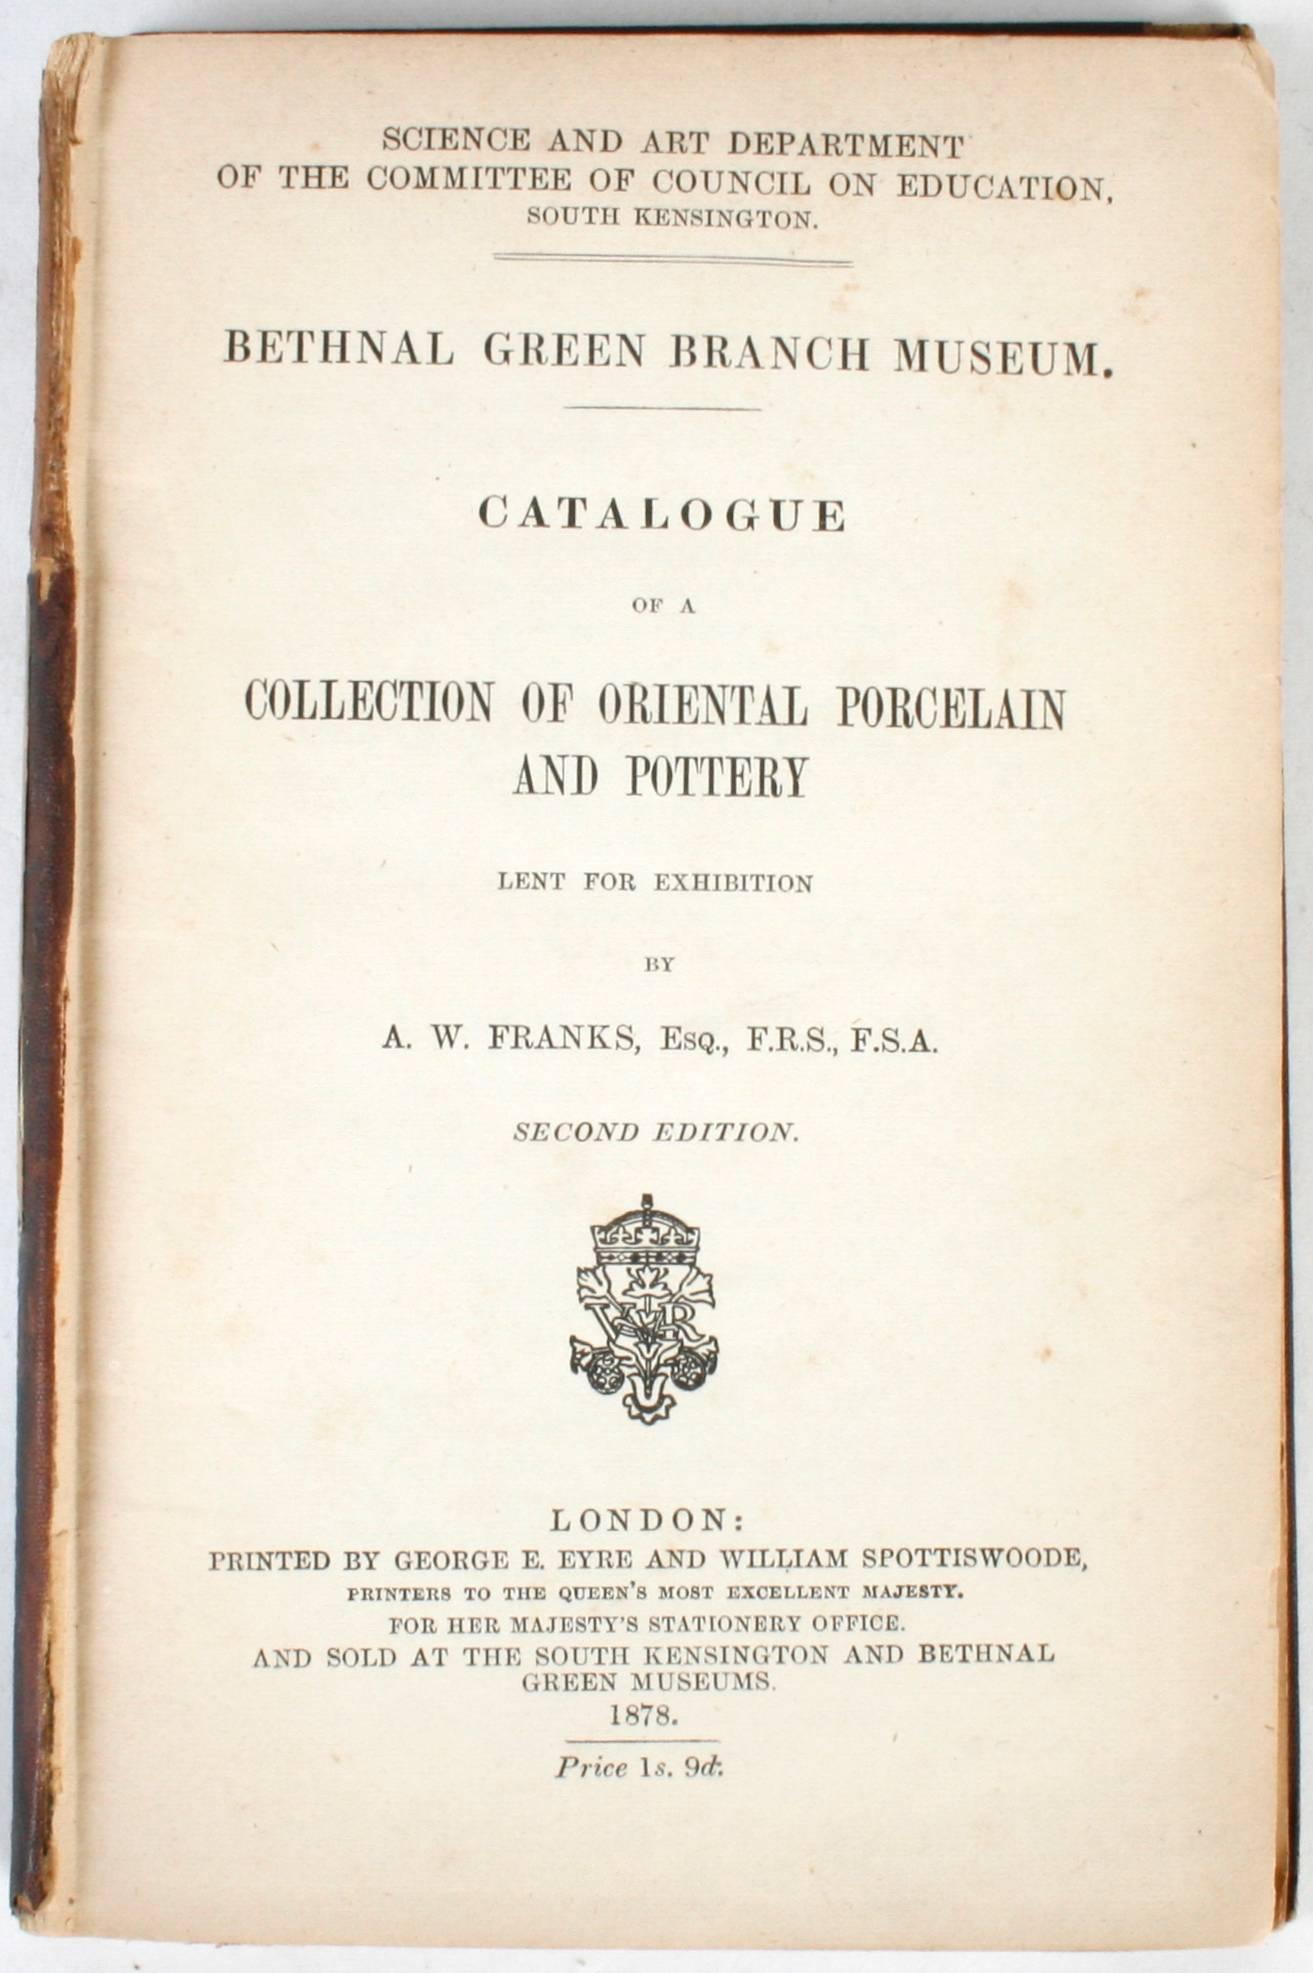 Catalogue of Franks Collection of Oriental Porcelain and Pottery. London: Bethnal Green Branch Museum, 1878. Second edition hardcover. 240 pp. An  exhibition catalogue of oriental porcelain and pottery loaned by Augustus Wollaston Franks (1826-1897)